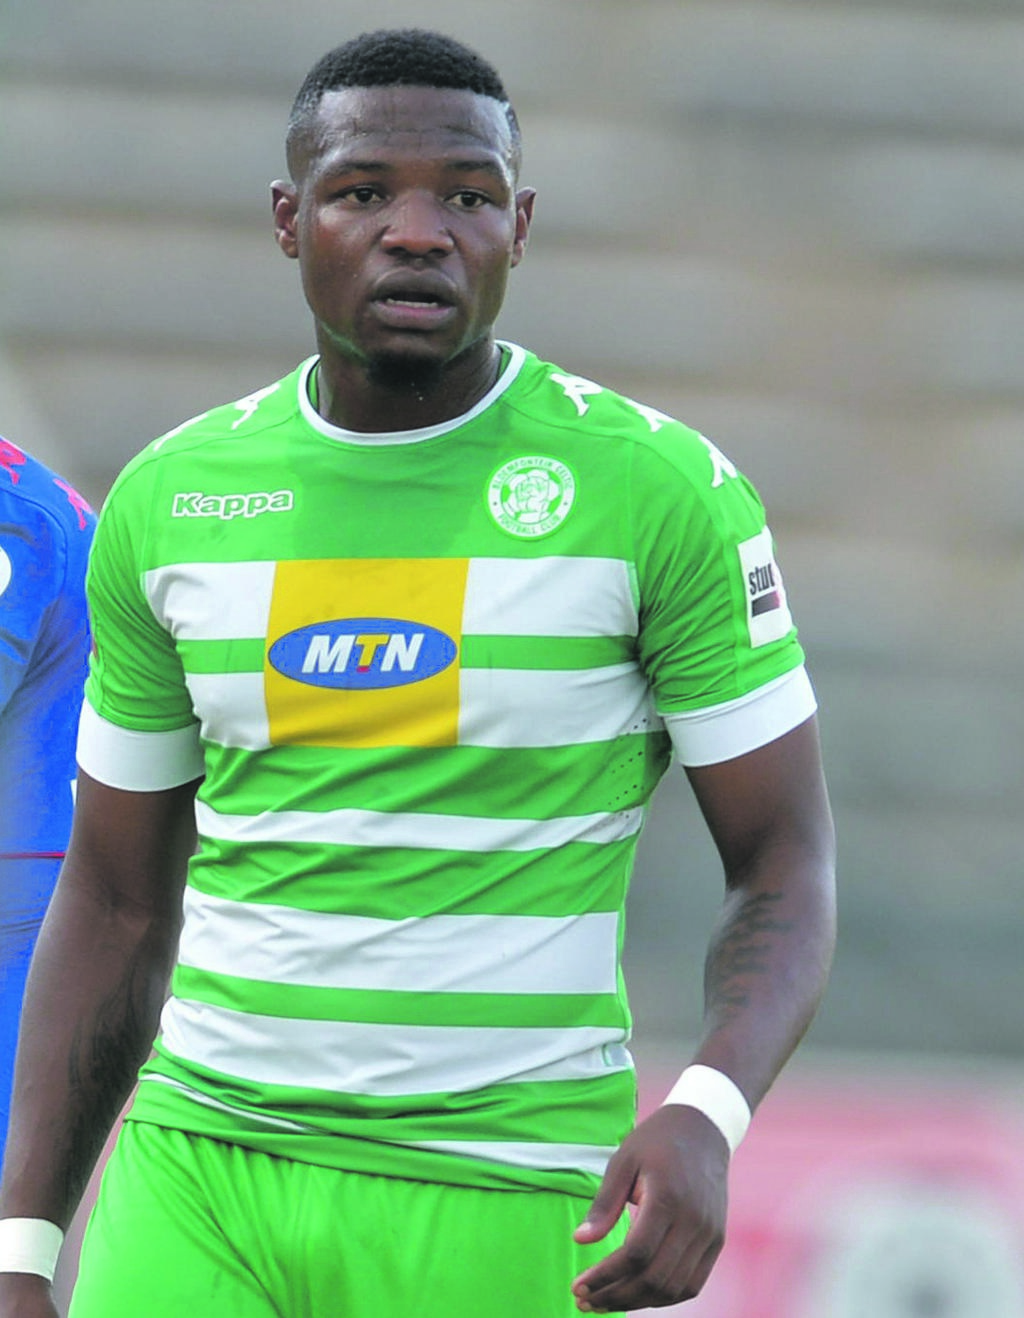 Tshegofatso Mabaso vows to make a meaningful contribution to Bafana Bafana if given a chance. Photo by GalloImages